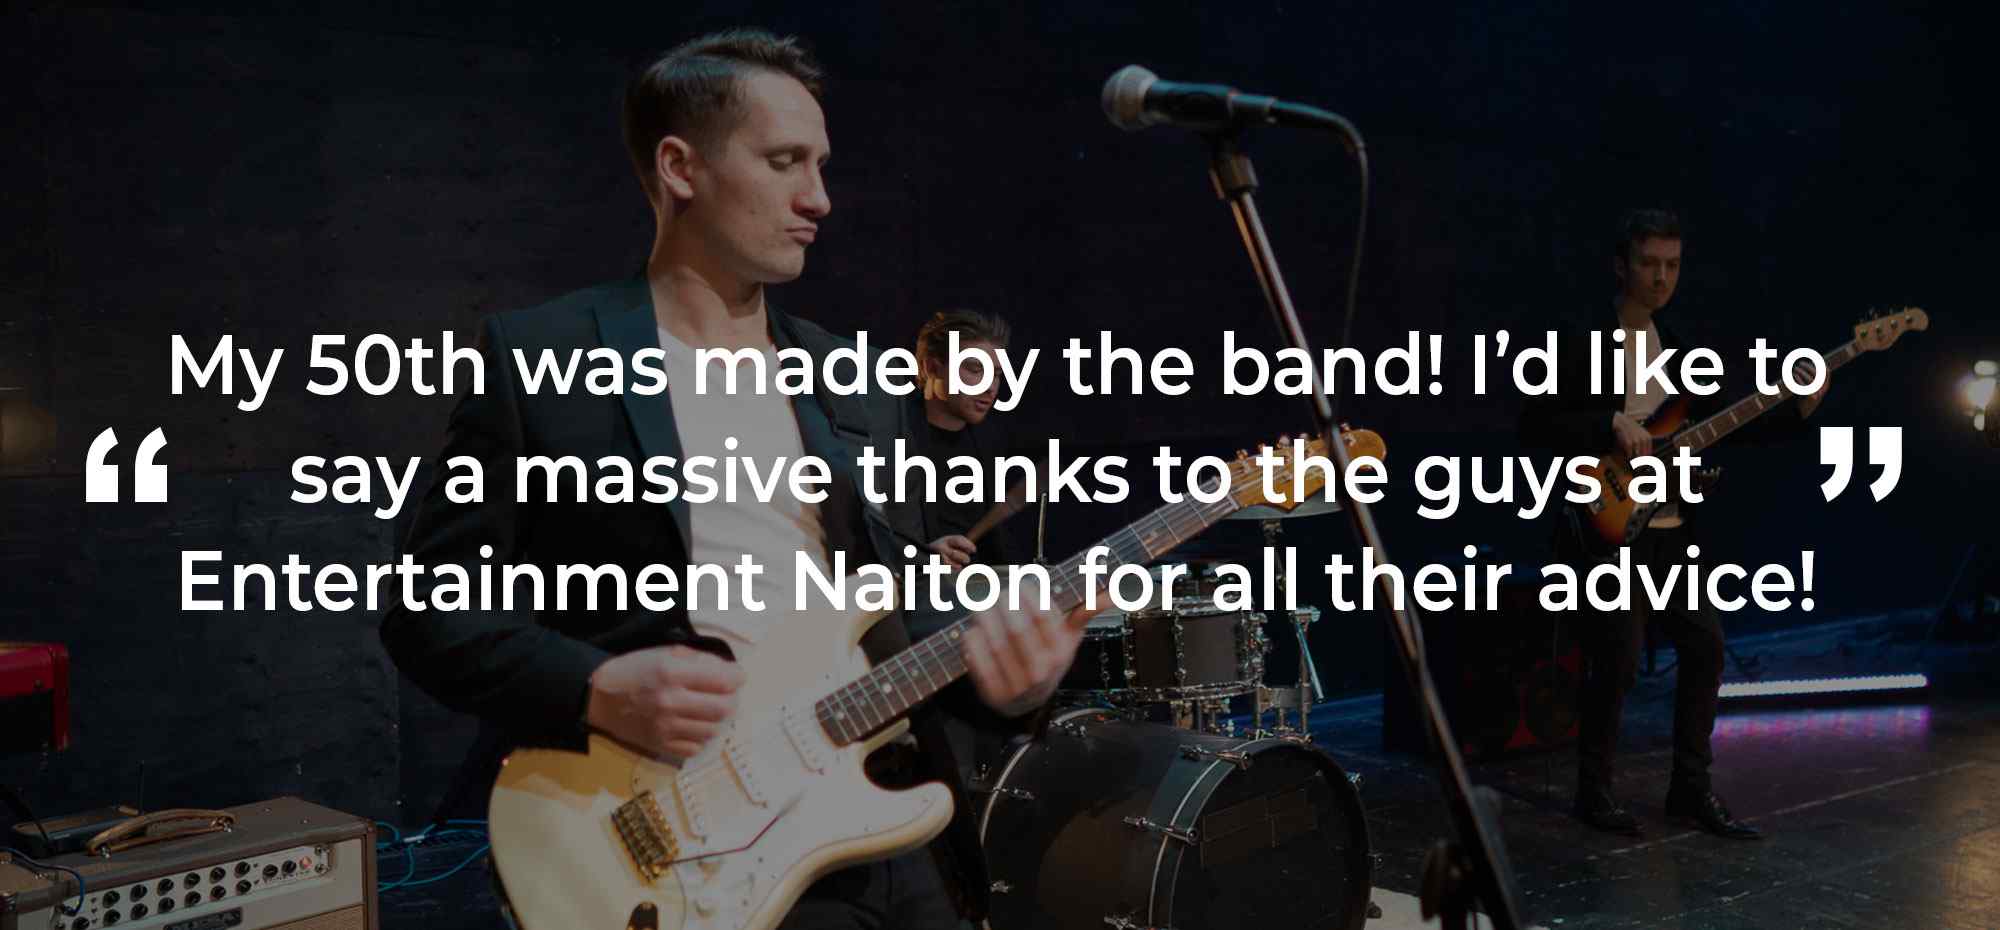 Client Review of a Party Band South Scotland